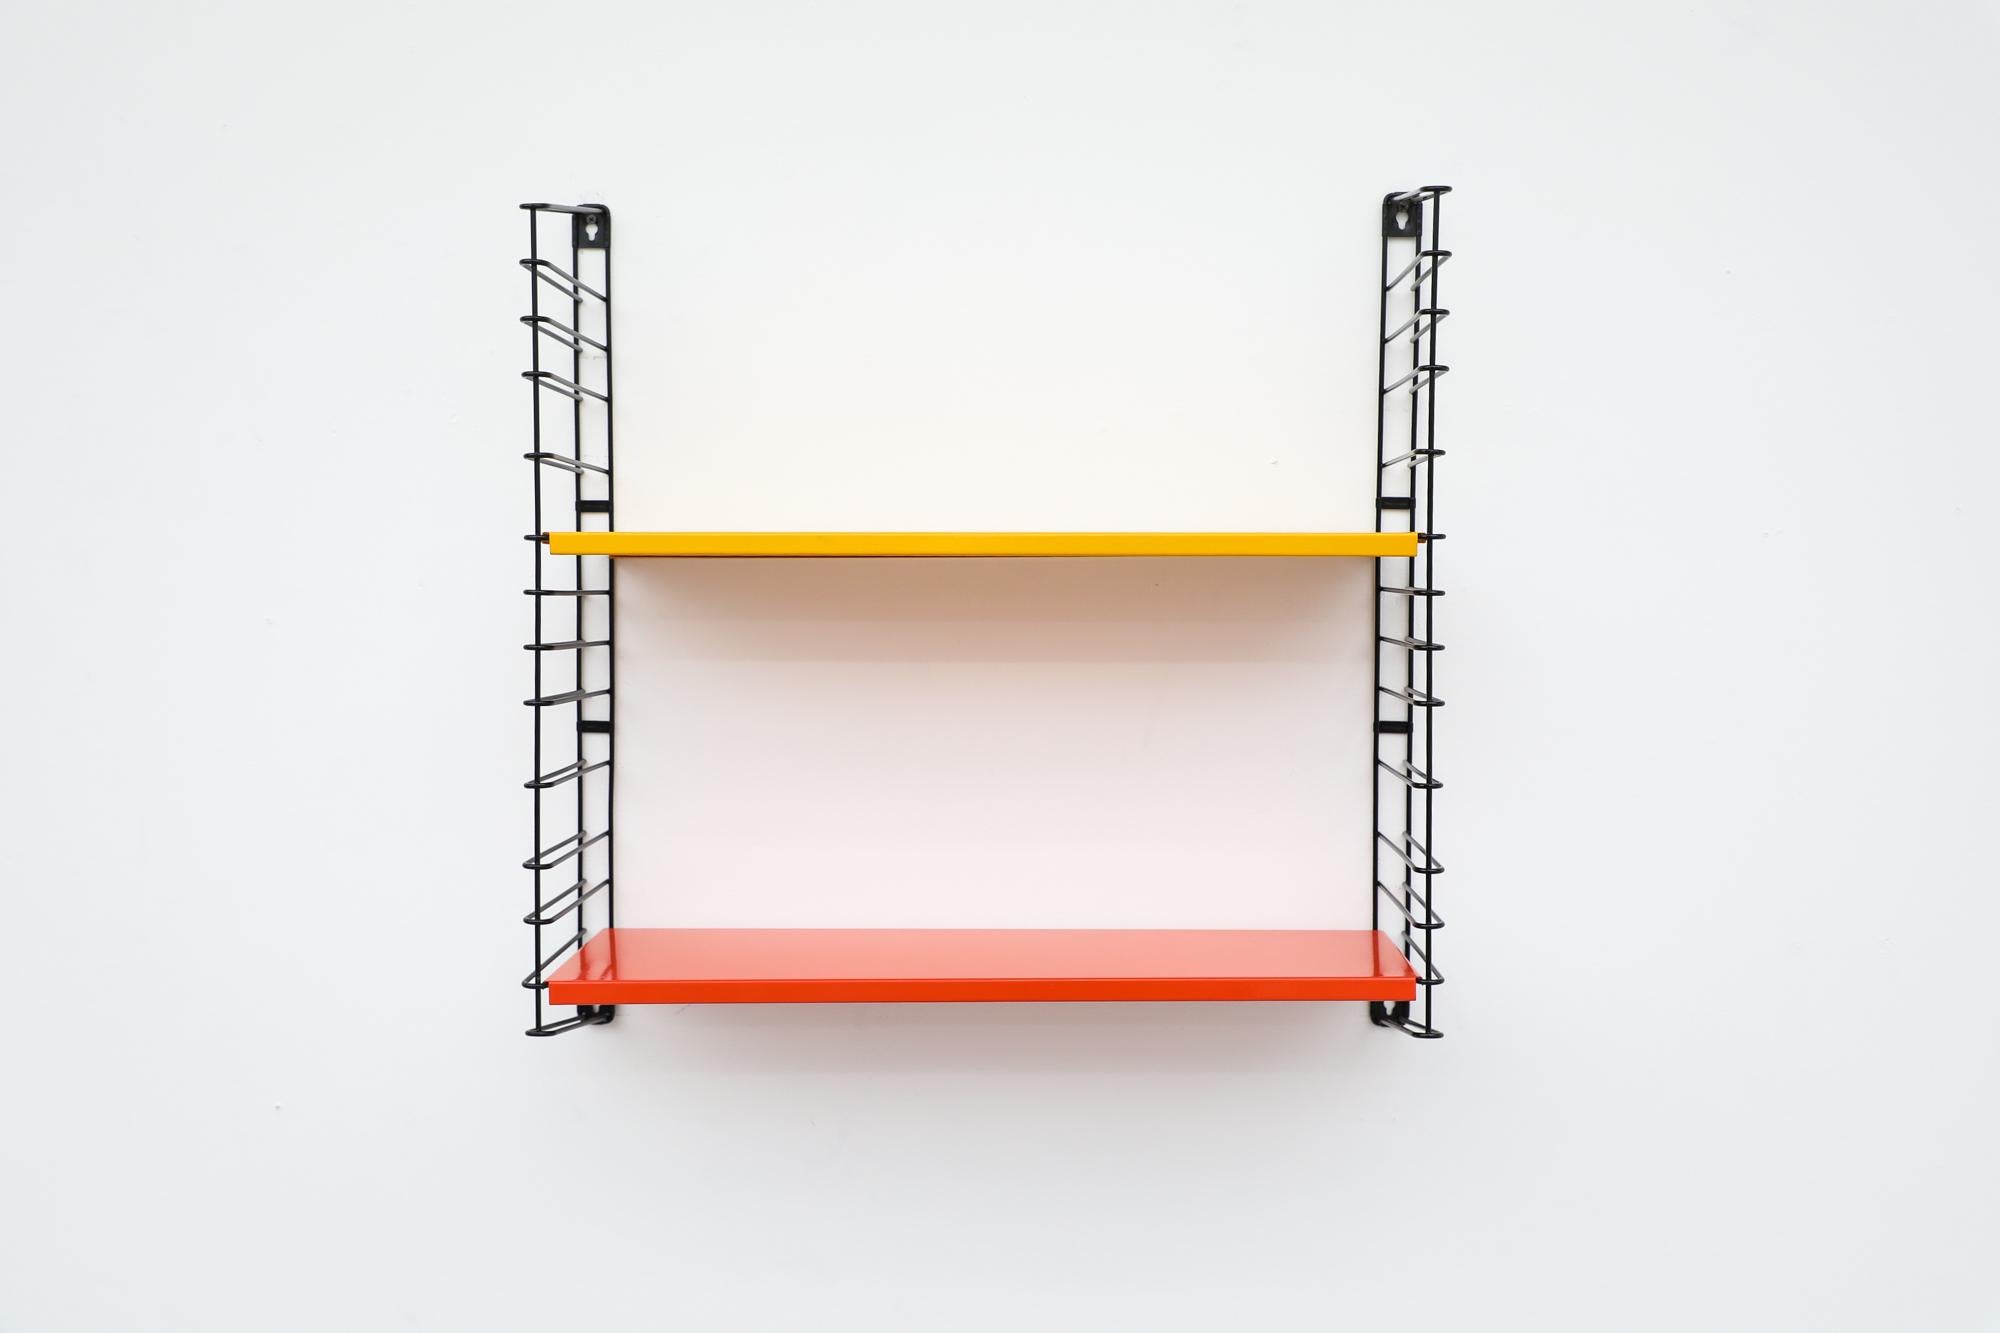 Midcentury TOMADO industrial shelving with newly powder coated yellow and orange shelves on black enameled metal wire risers. Designed by Jan van der Togt. Both shelves rest on the wire risers and can be arranged to different heights. Others